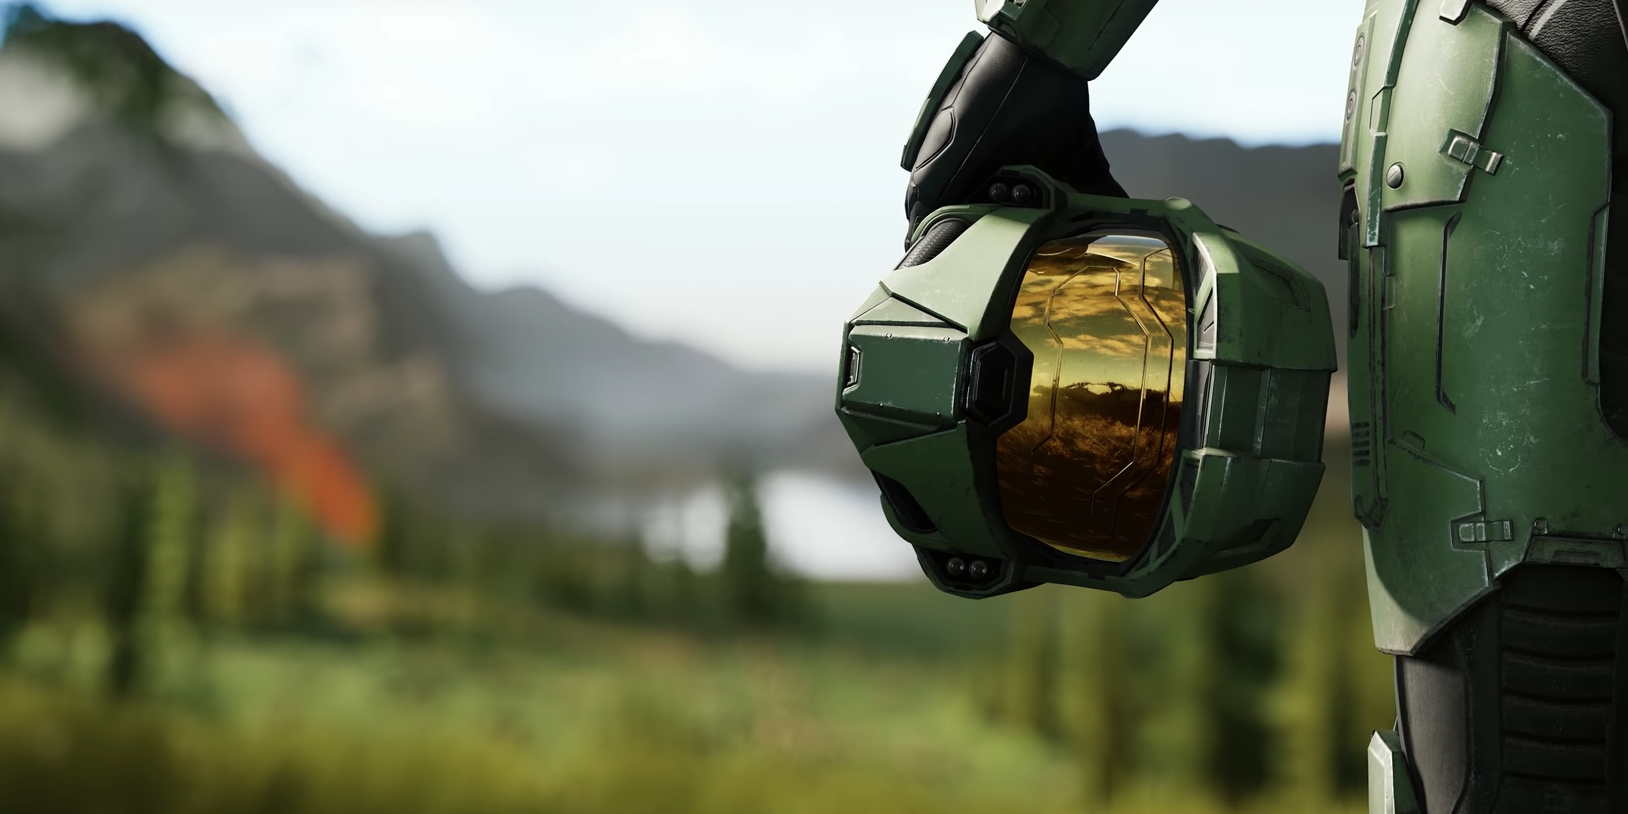 halo infinite story guide